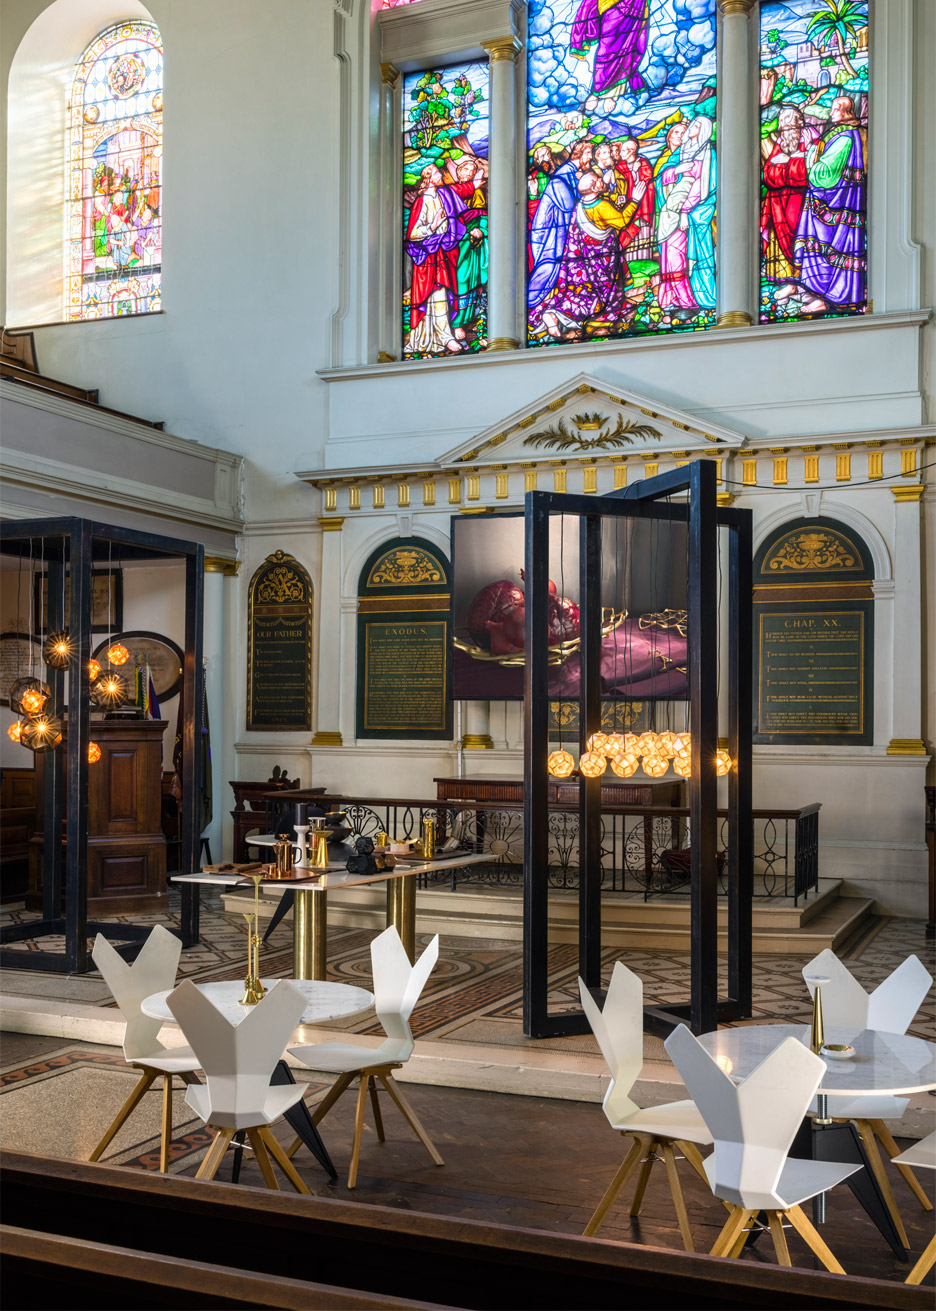 Tom Dixon furniture and lighting exhibition at The Church for Clerkenwell Design Week 2016